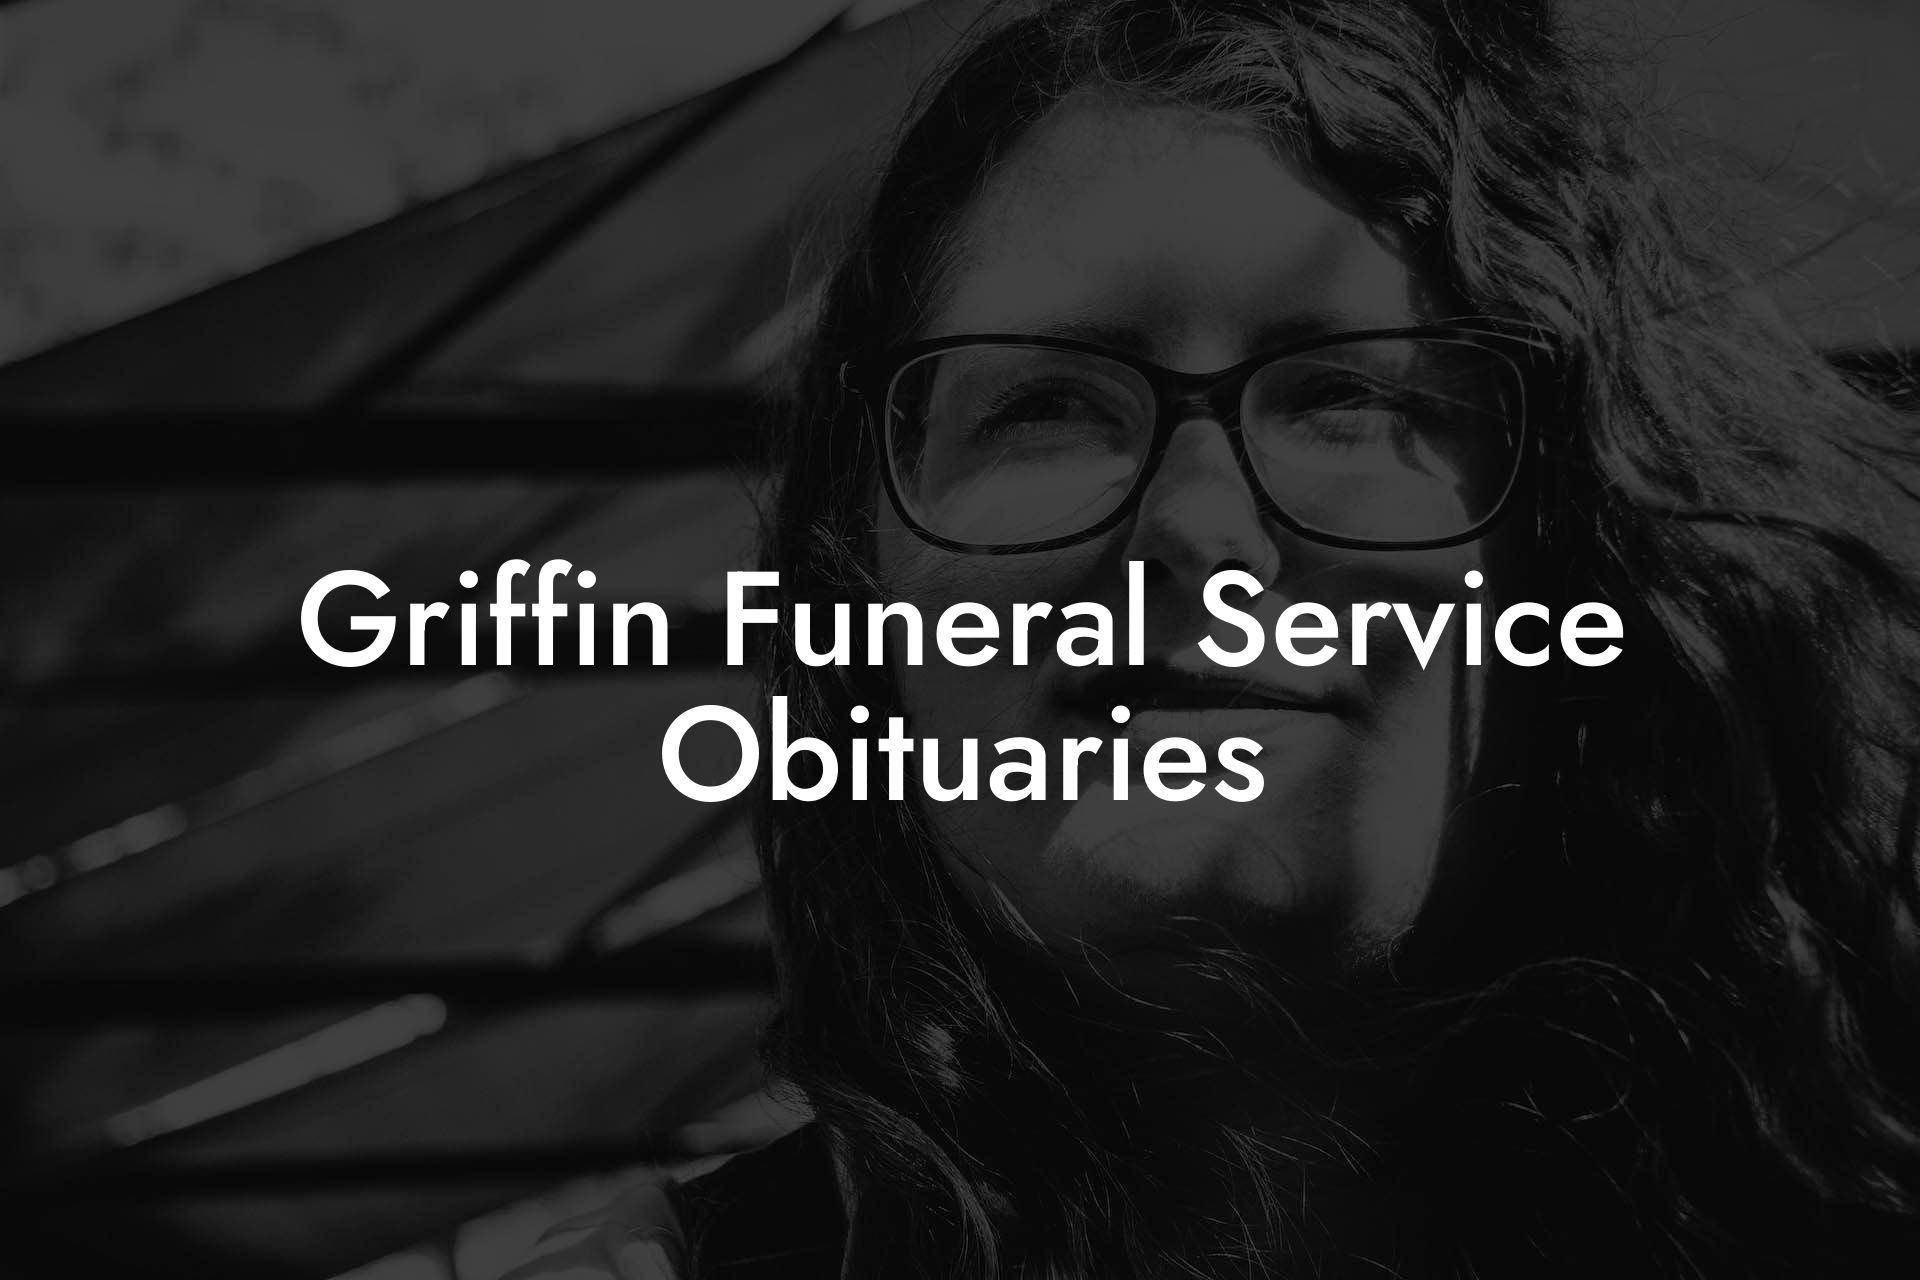 Griffin Funeral Service Obituaries